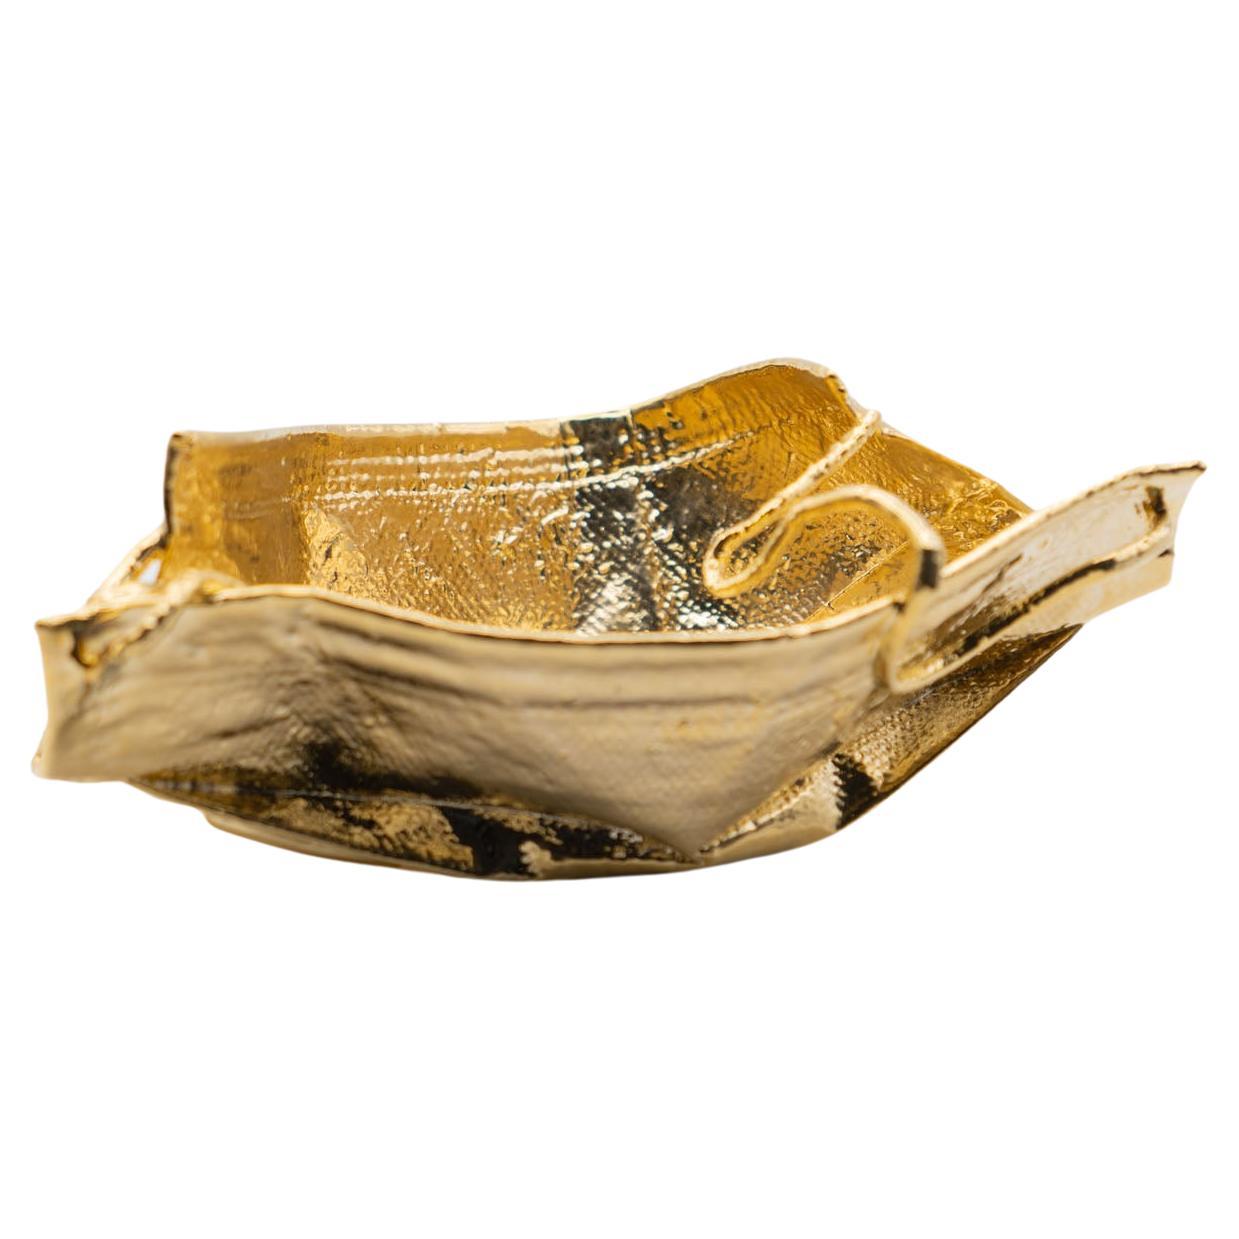 Remask Act 001 Gold Art Objects for Objects for Surgical Mask by Enrico Girotti en vente